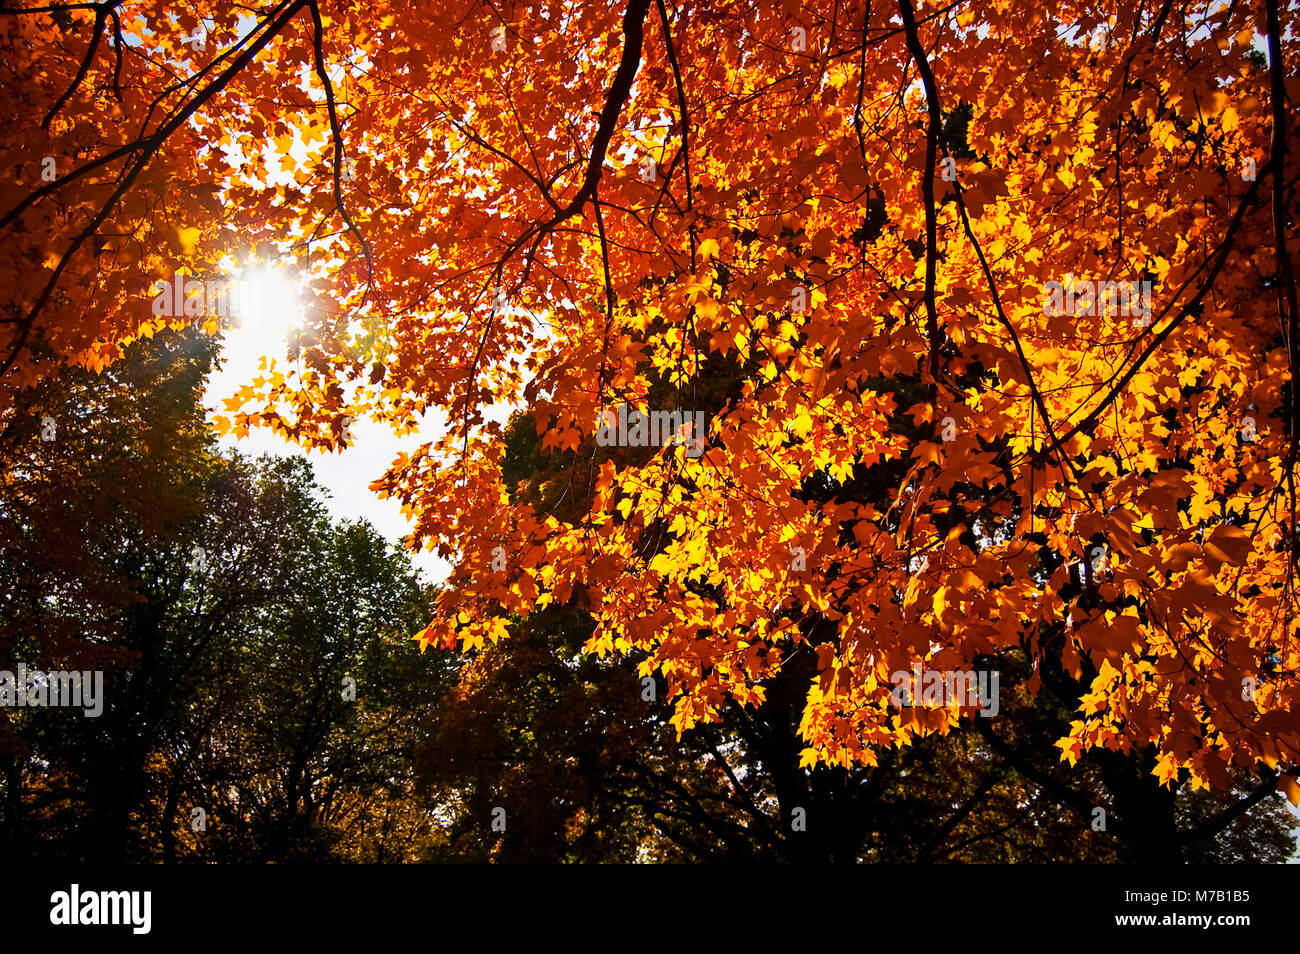 Maple leaves on a tree, Central Park, Manhattan, New York City, New York State, USA Stock Photo